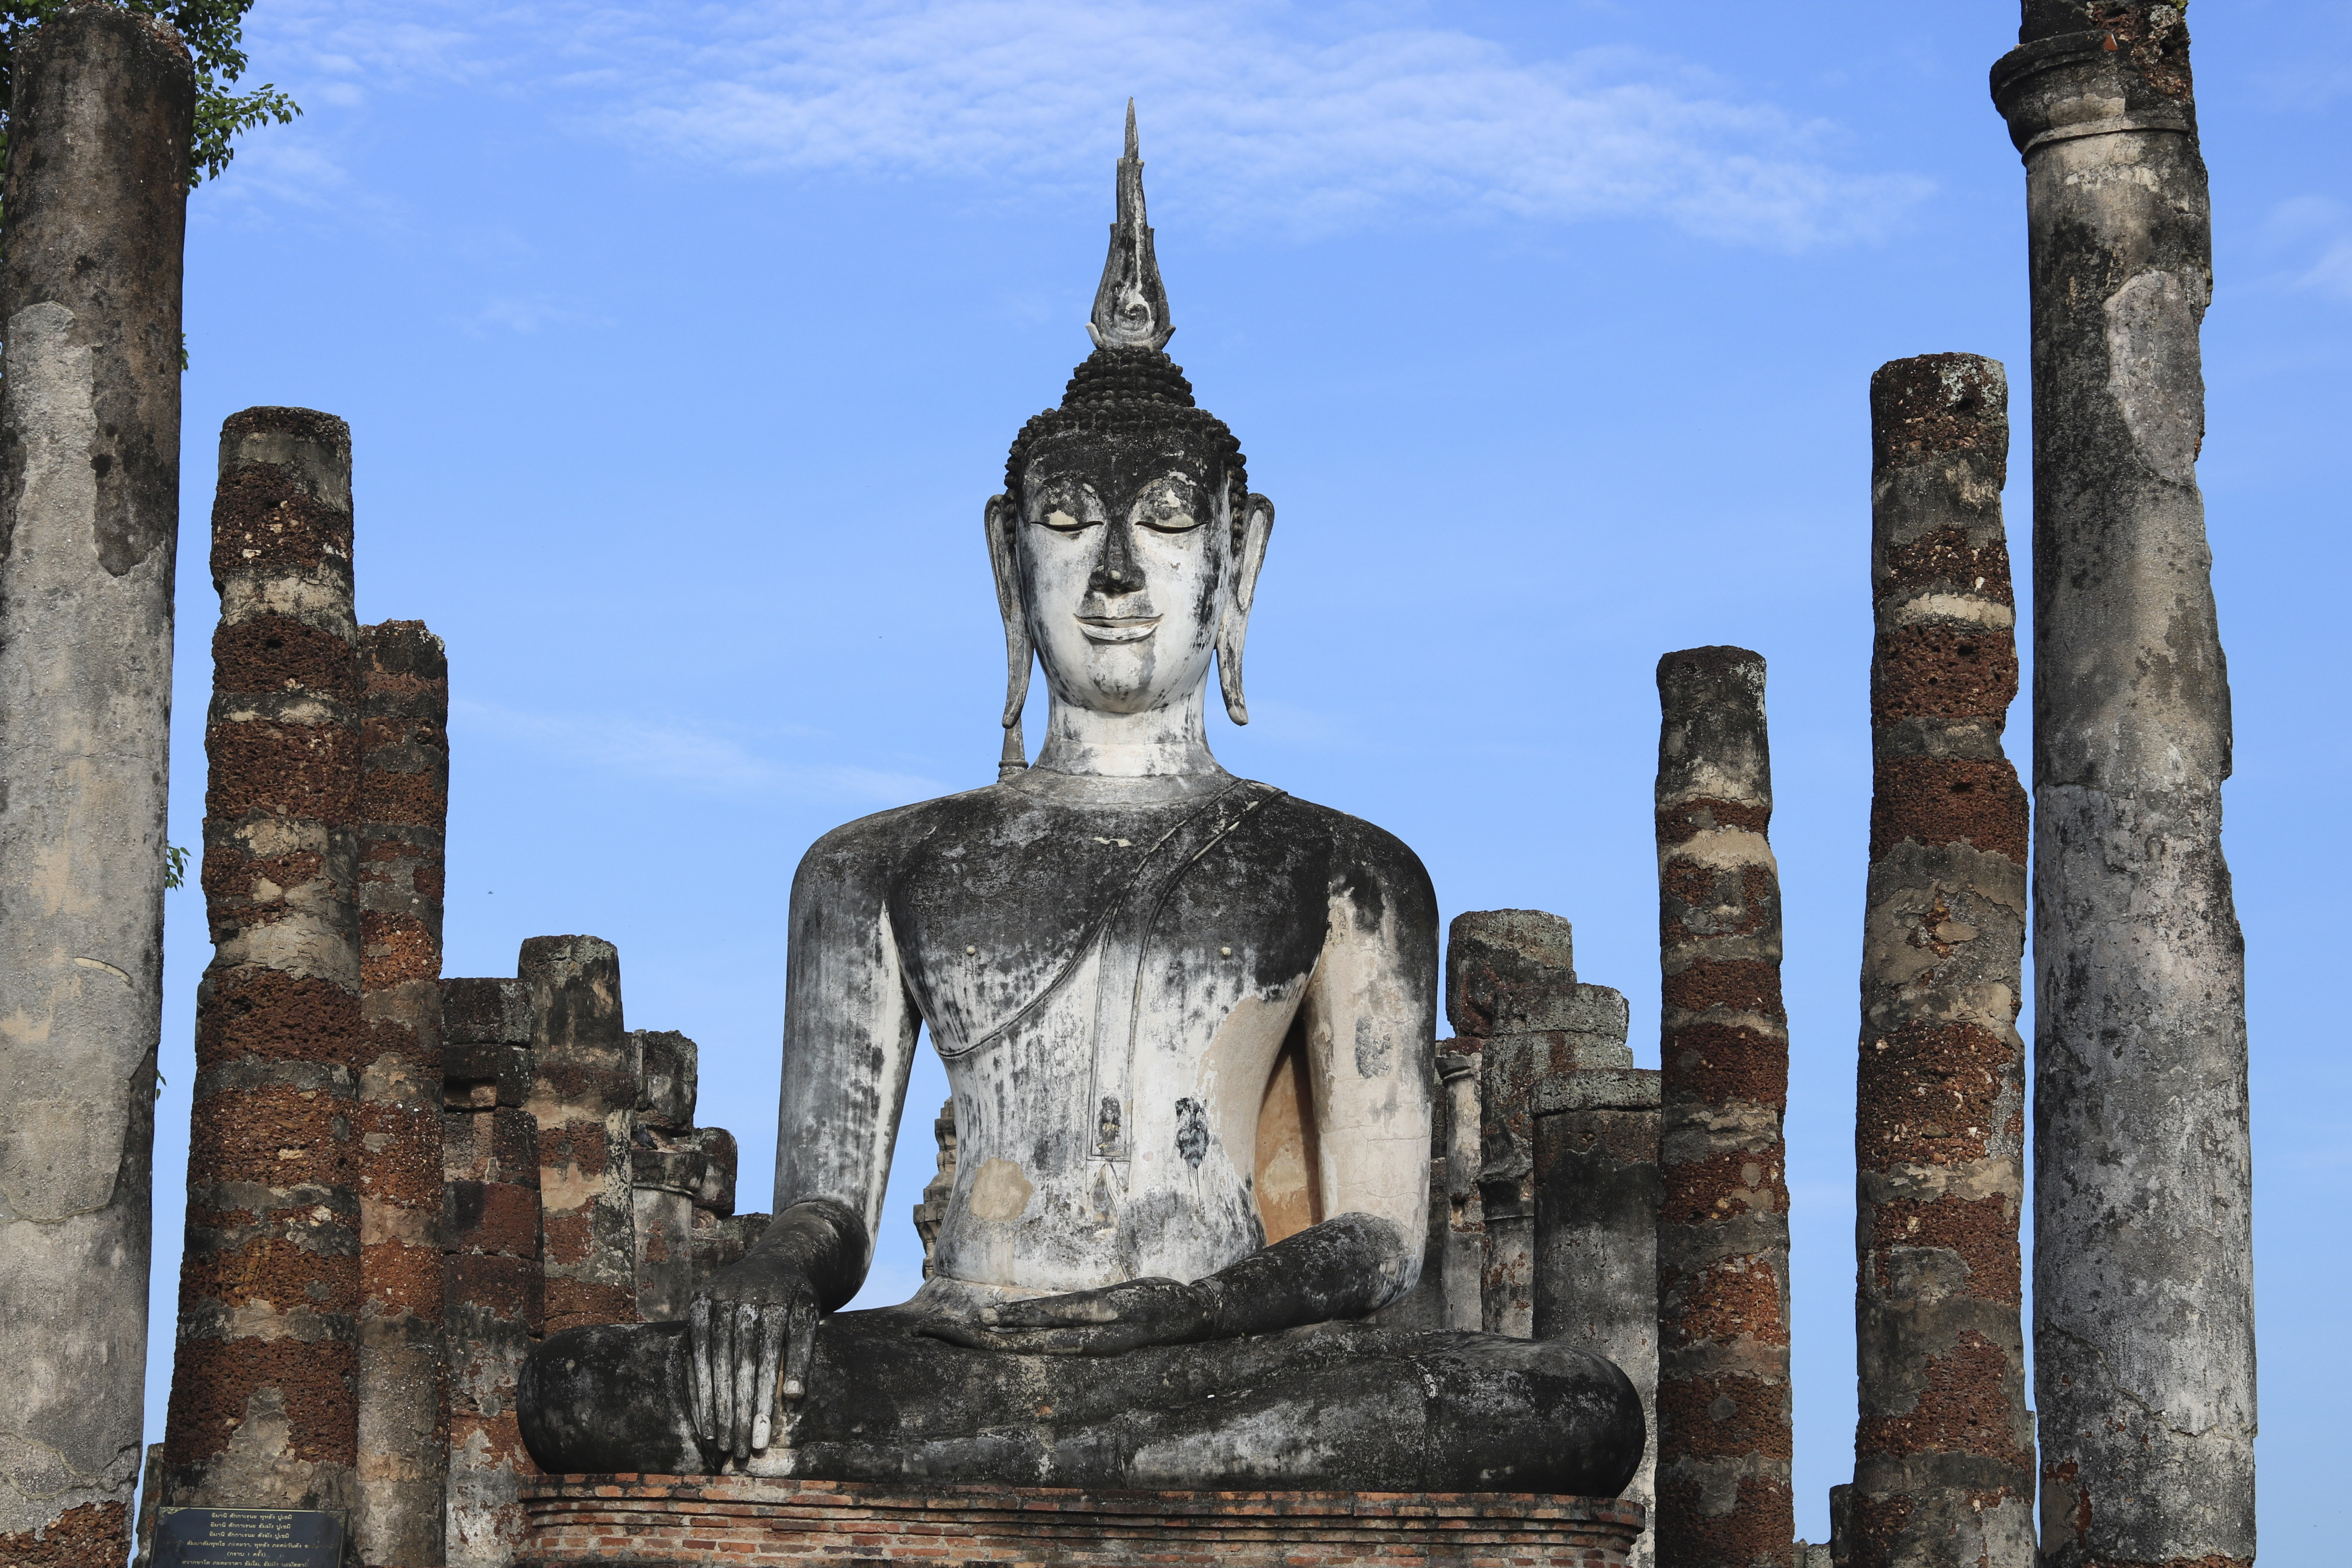 A statue of the Buddha in earth-touching pose in Wat Mahathat, Sukhothai, Thailand. Photo: Thomas Bird